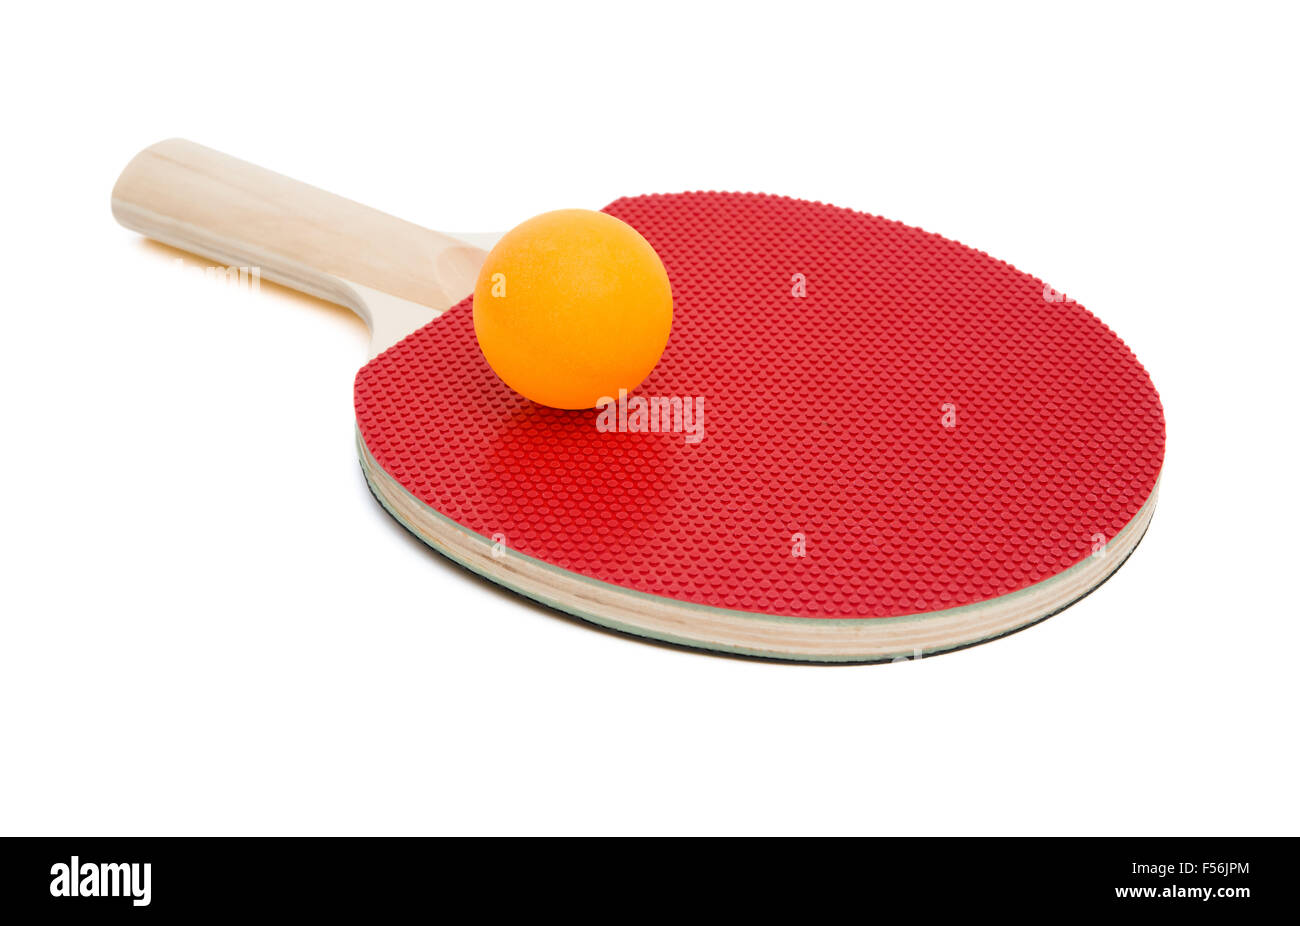 pingpong rackets and ball on white with clipping path Stock Photo